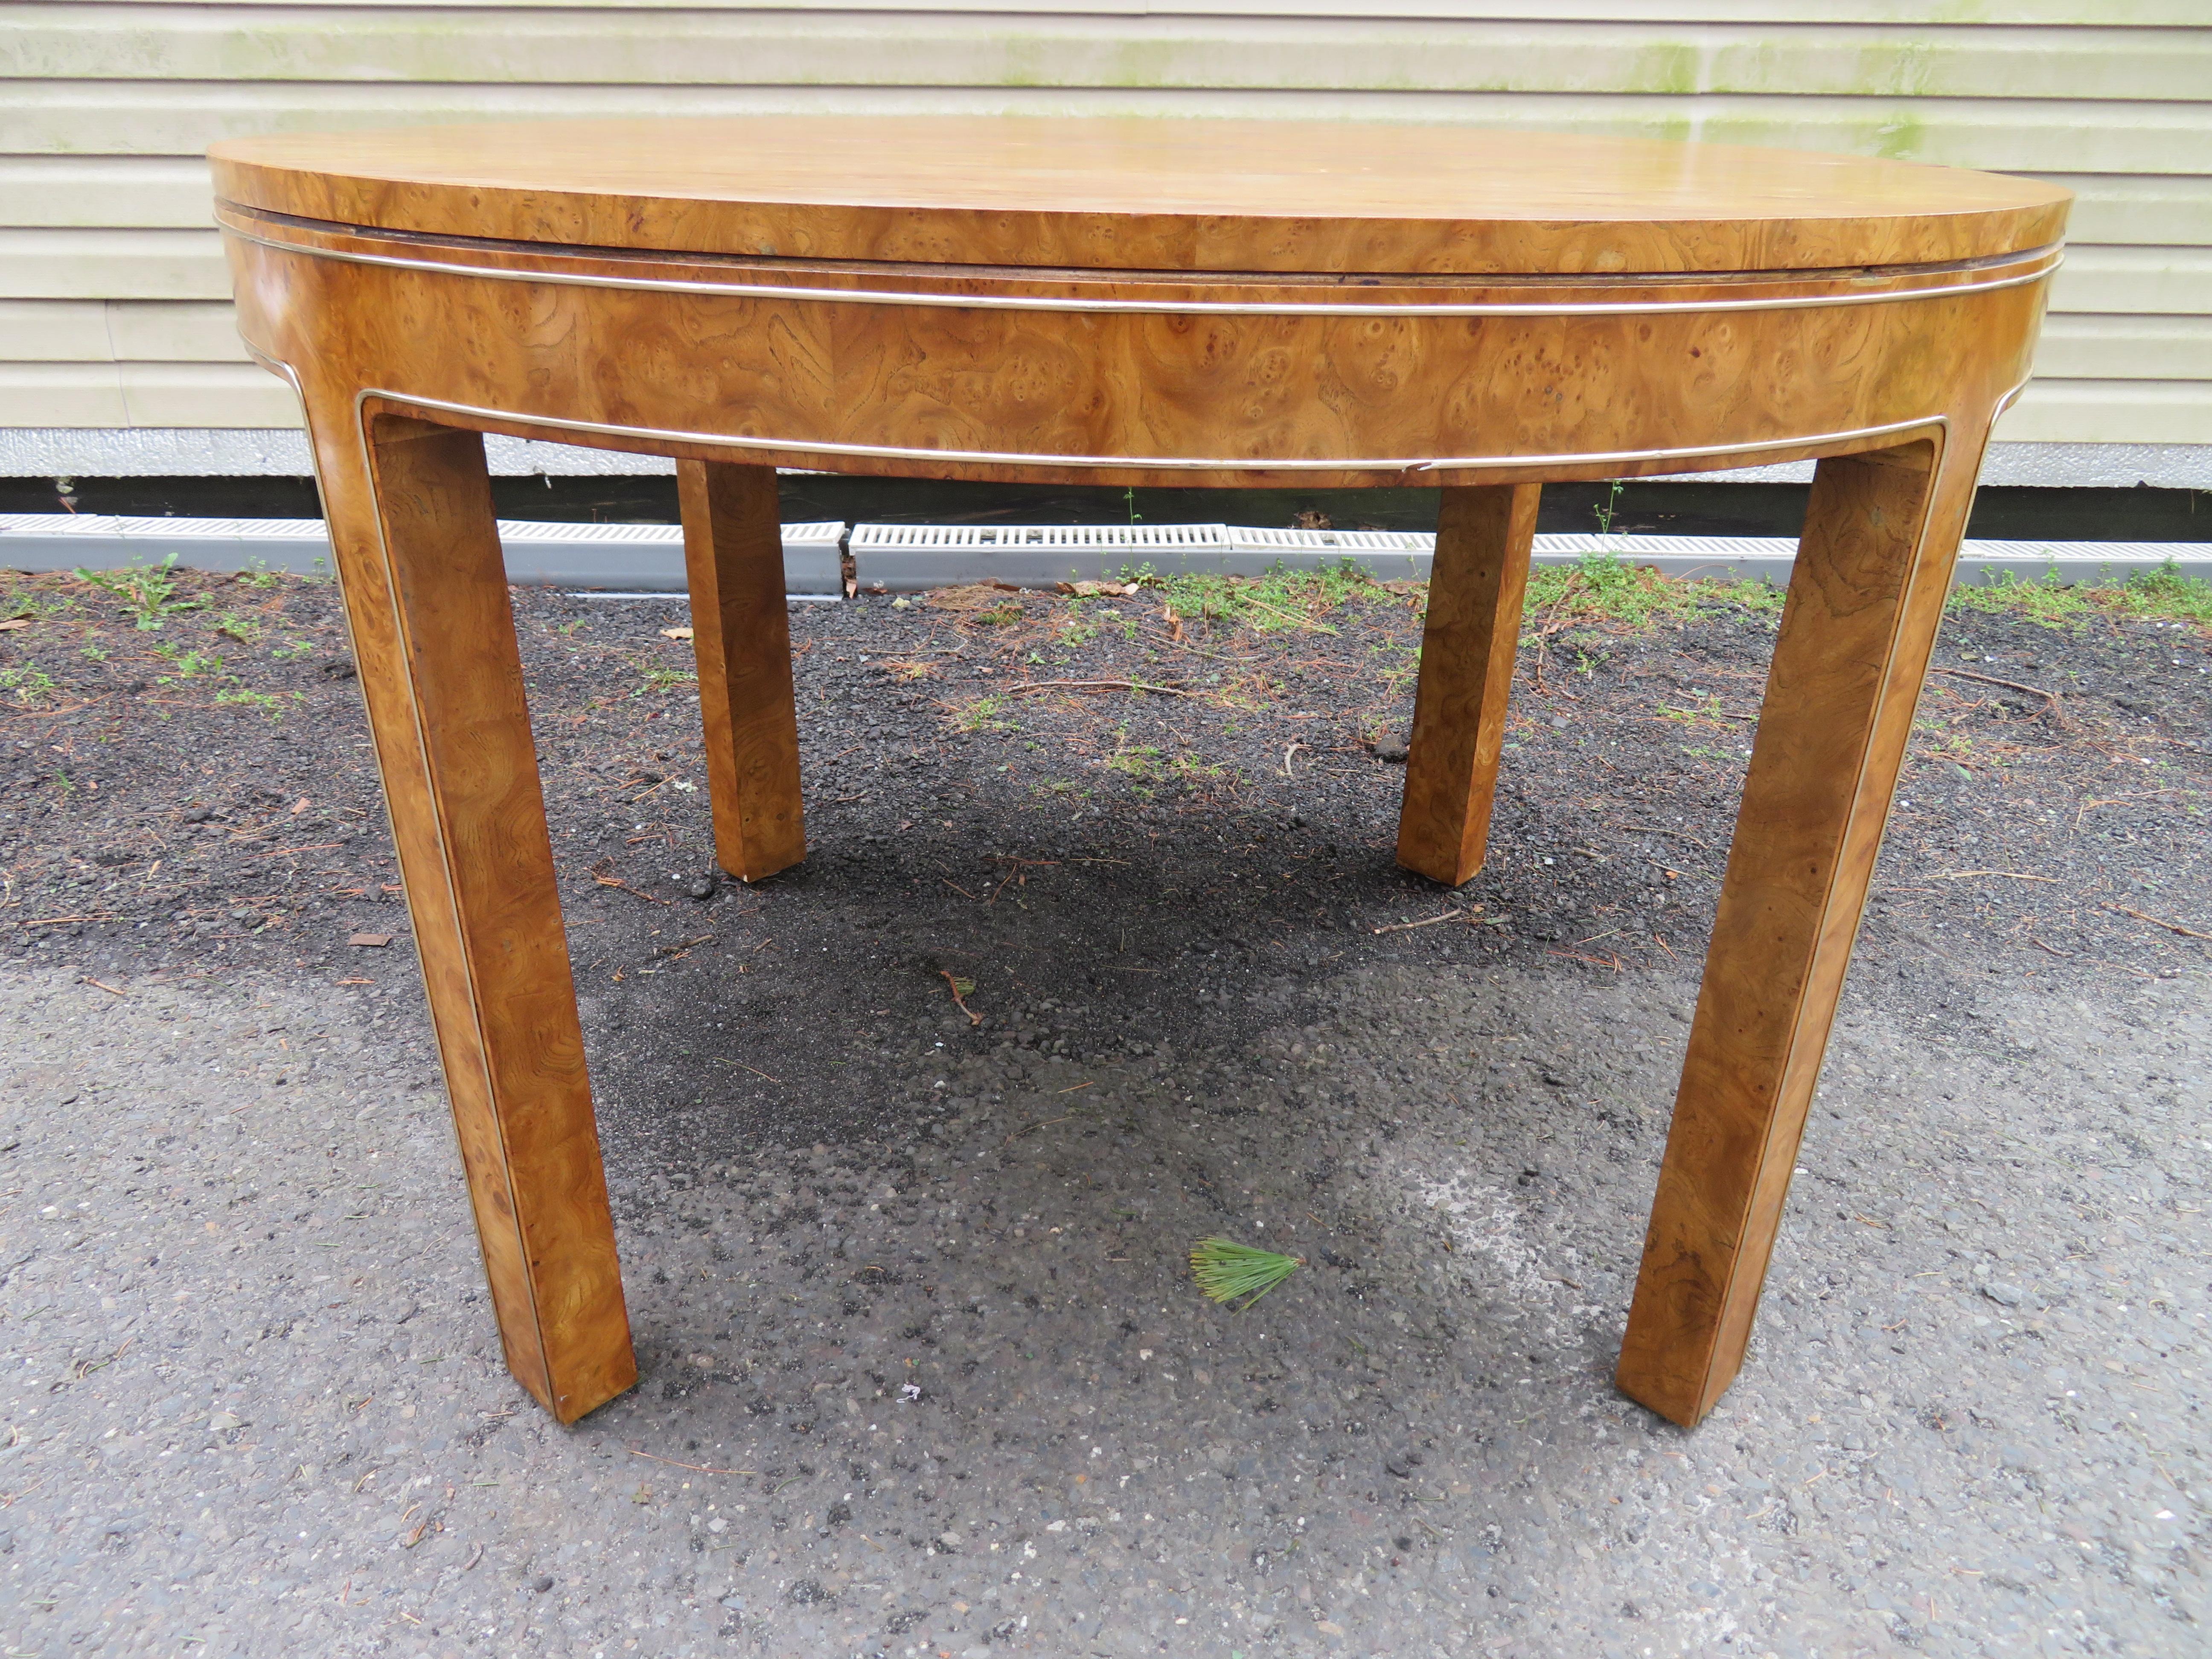 Wonderful round Mastercraft burled dining table with 2 leaves. We love the petite size and brass detailing on the sides and down the legs. This table measures 29.75